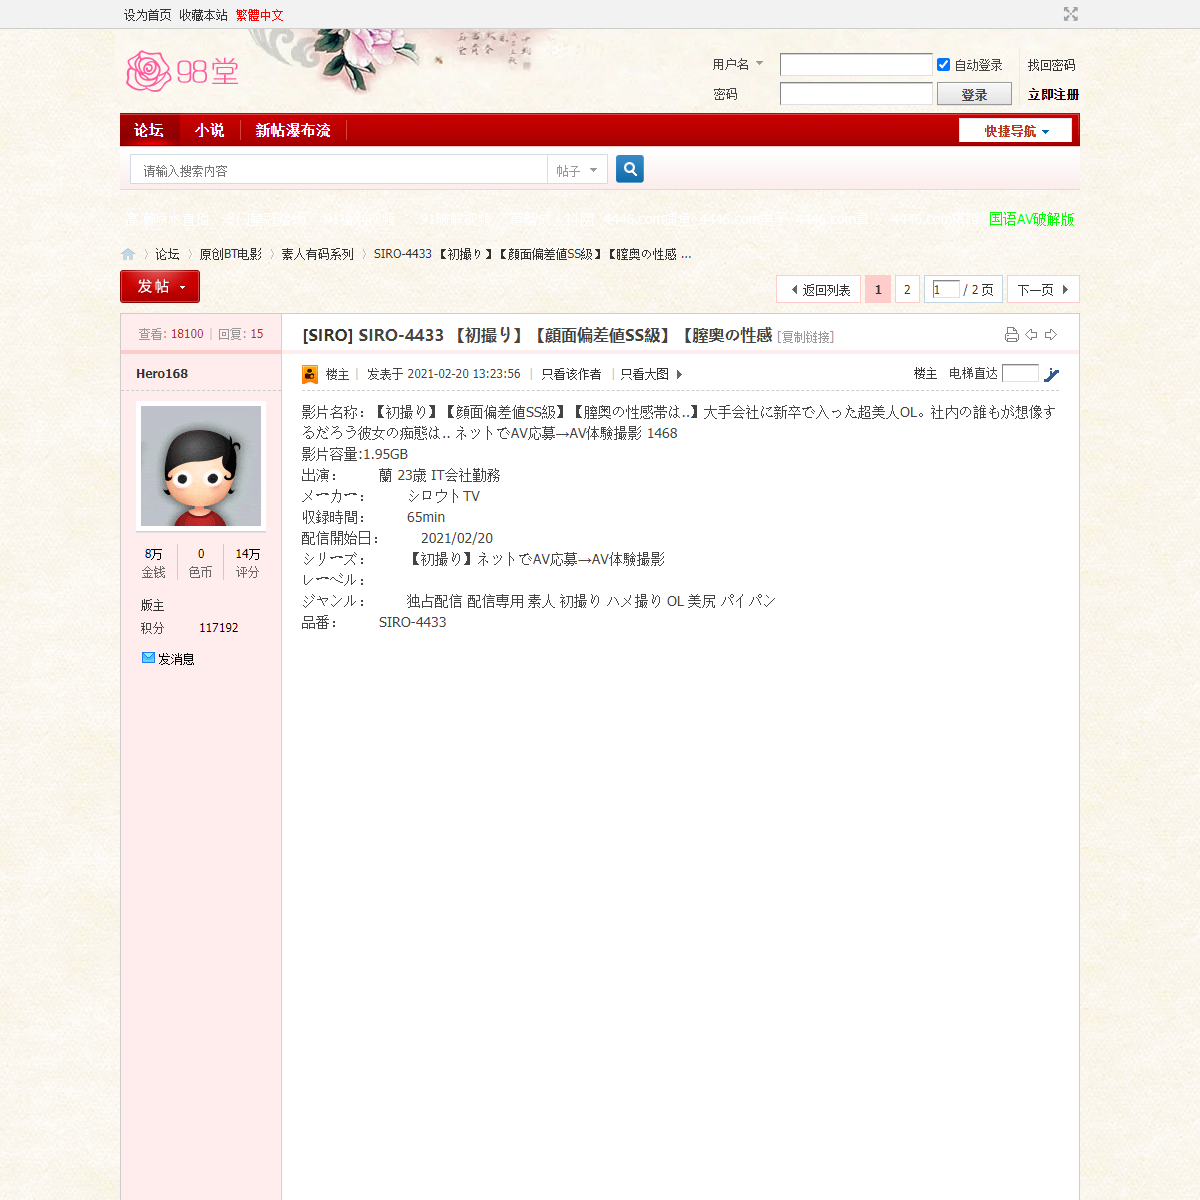 A complete backup of https://sehuatang.net/thread-482924-1-1.html